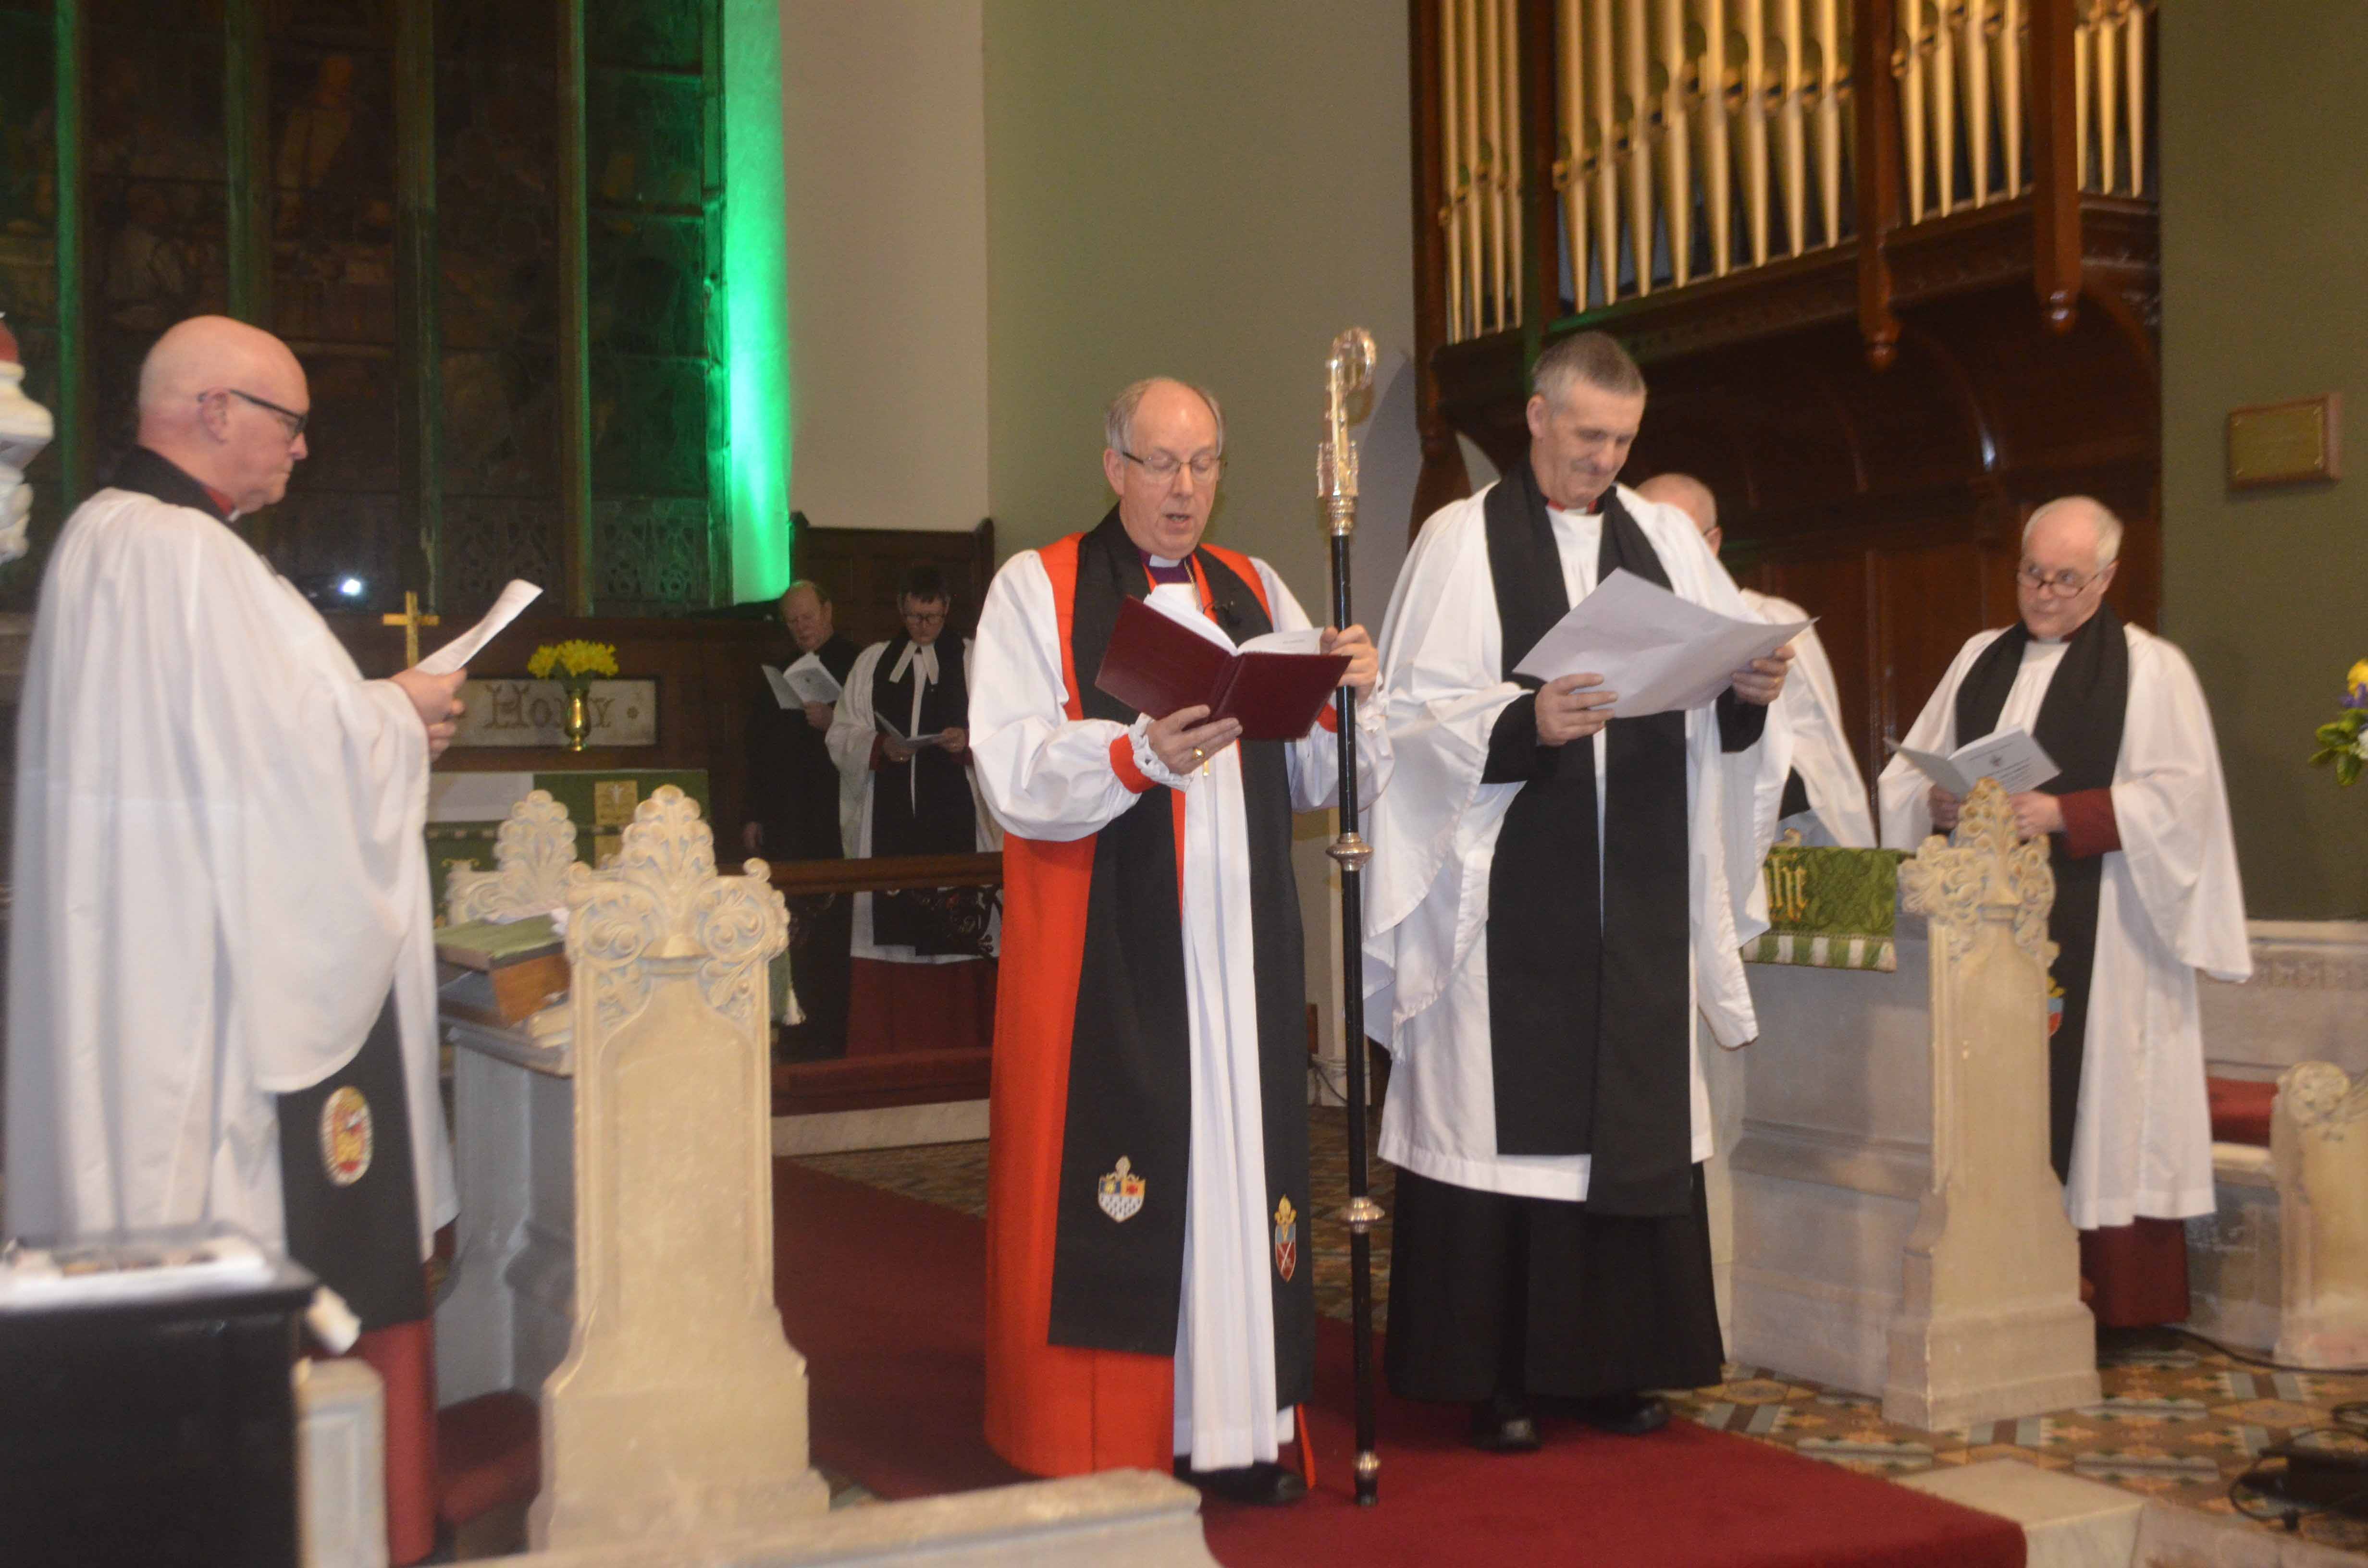 The new rector of Christ Church, Strabane, the Rev John White (second from right) is instituted by the Bishop of Derry and Raphoe, the Rt Rev Ken Good. Also included are the preacher, the Rev Canon Paul Hoey, (left) and the Rural Dean, the Rev Canon Robert Clarke (right).